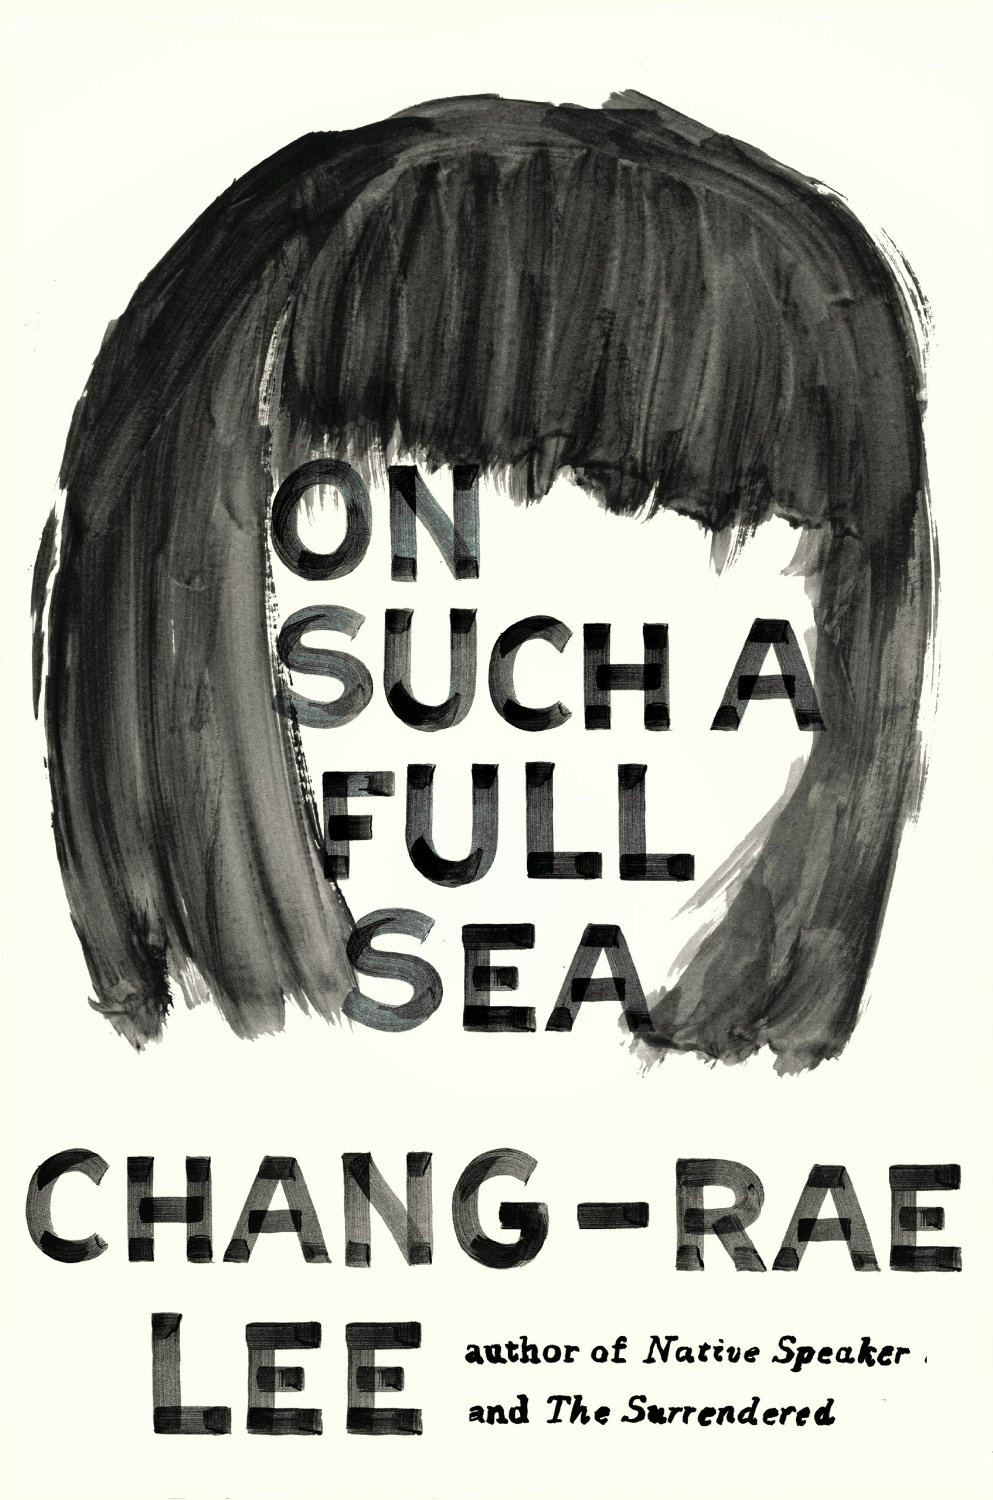 On Such a Full Sea design by Helen Yentus